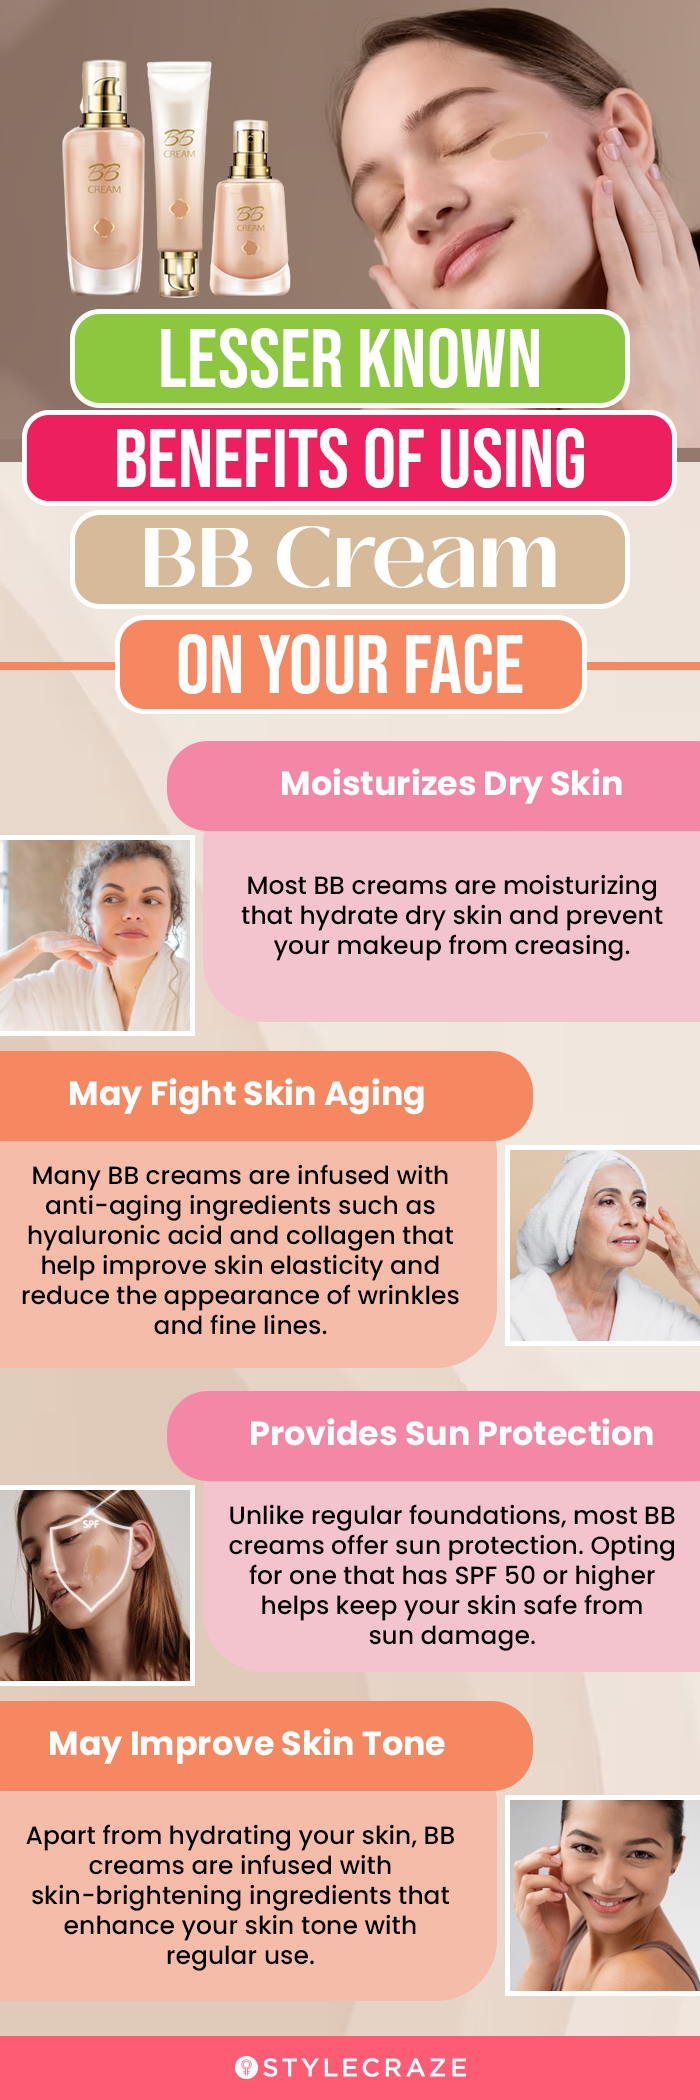 Benefits Of Using BB Cream On Your Face (infographic)